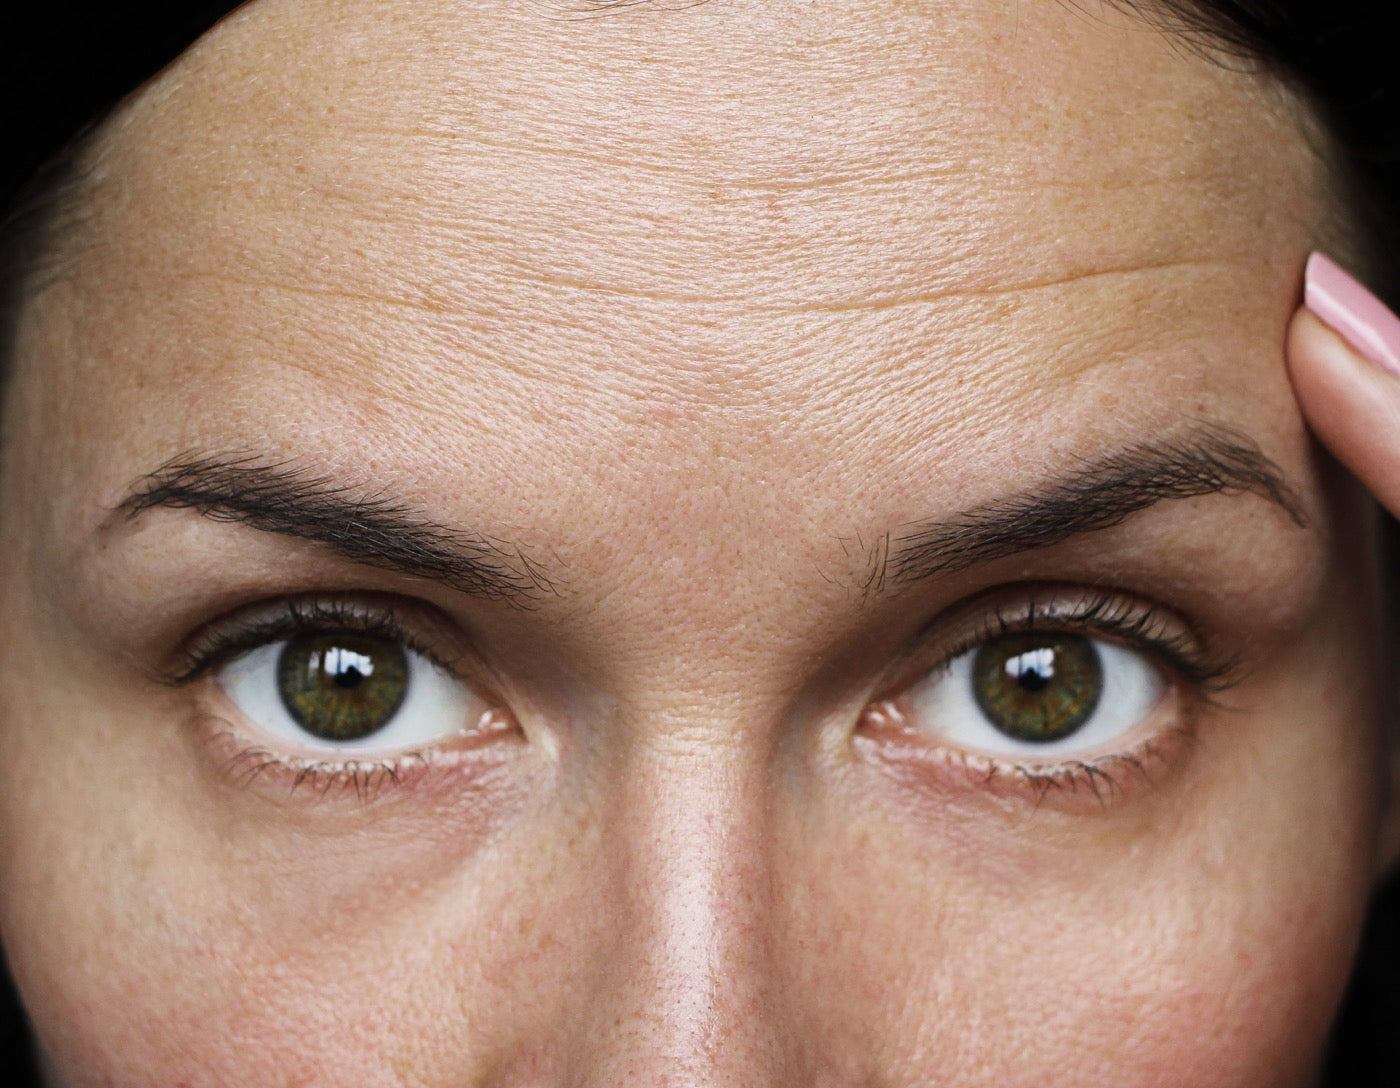 Womens face showing forehead wrinkles